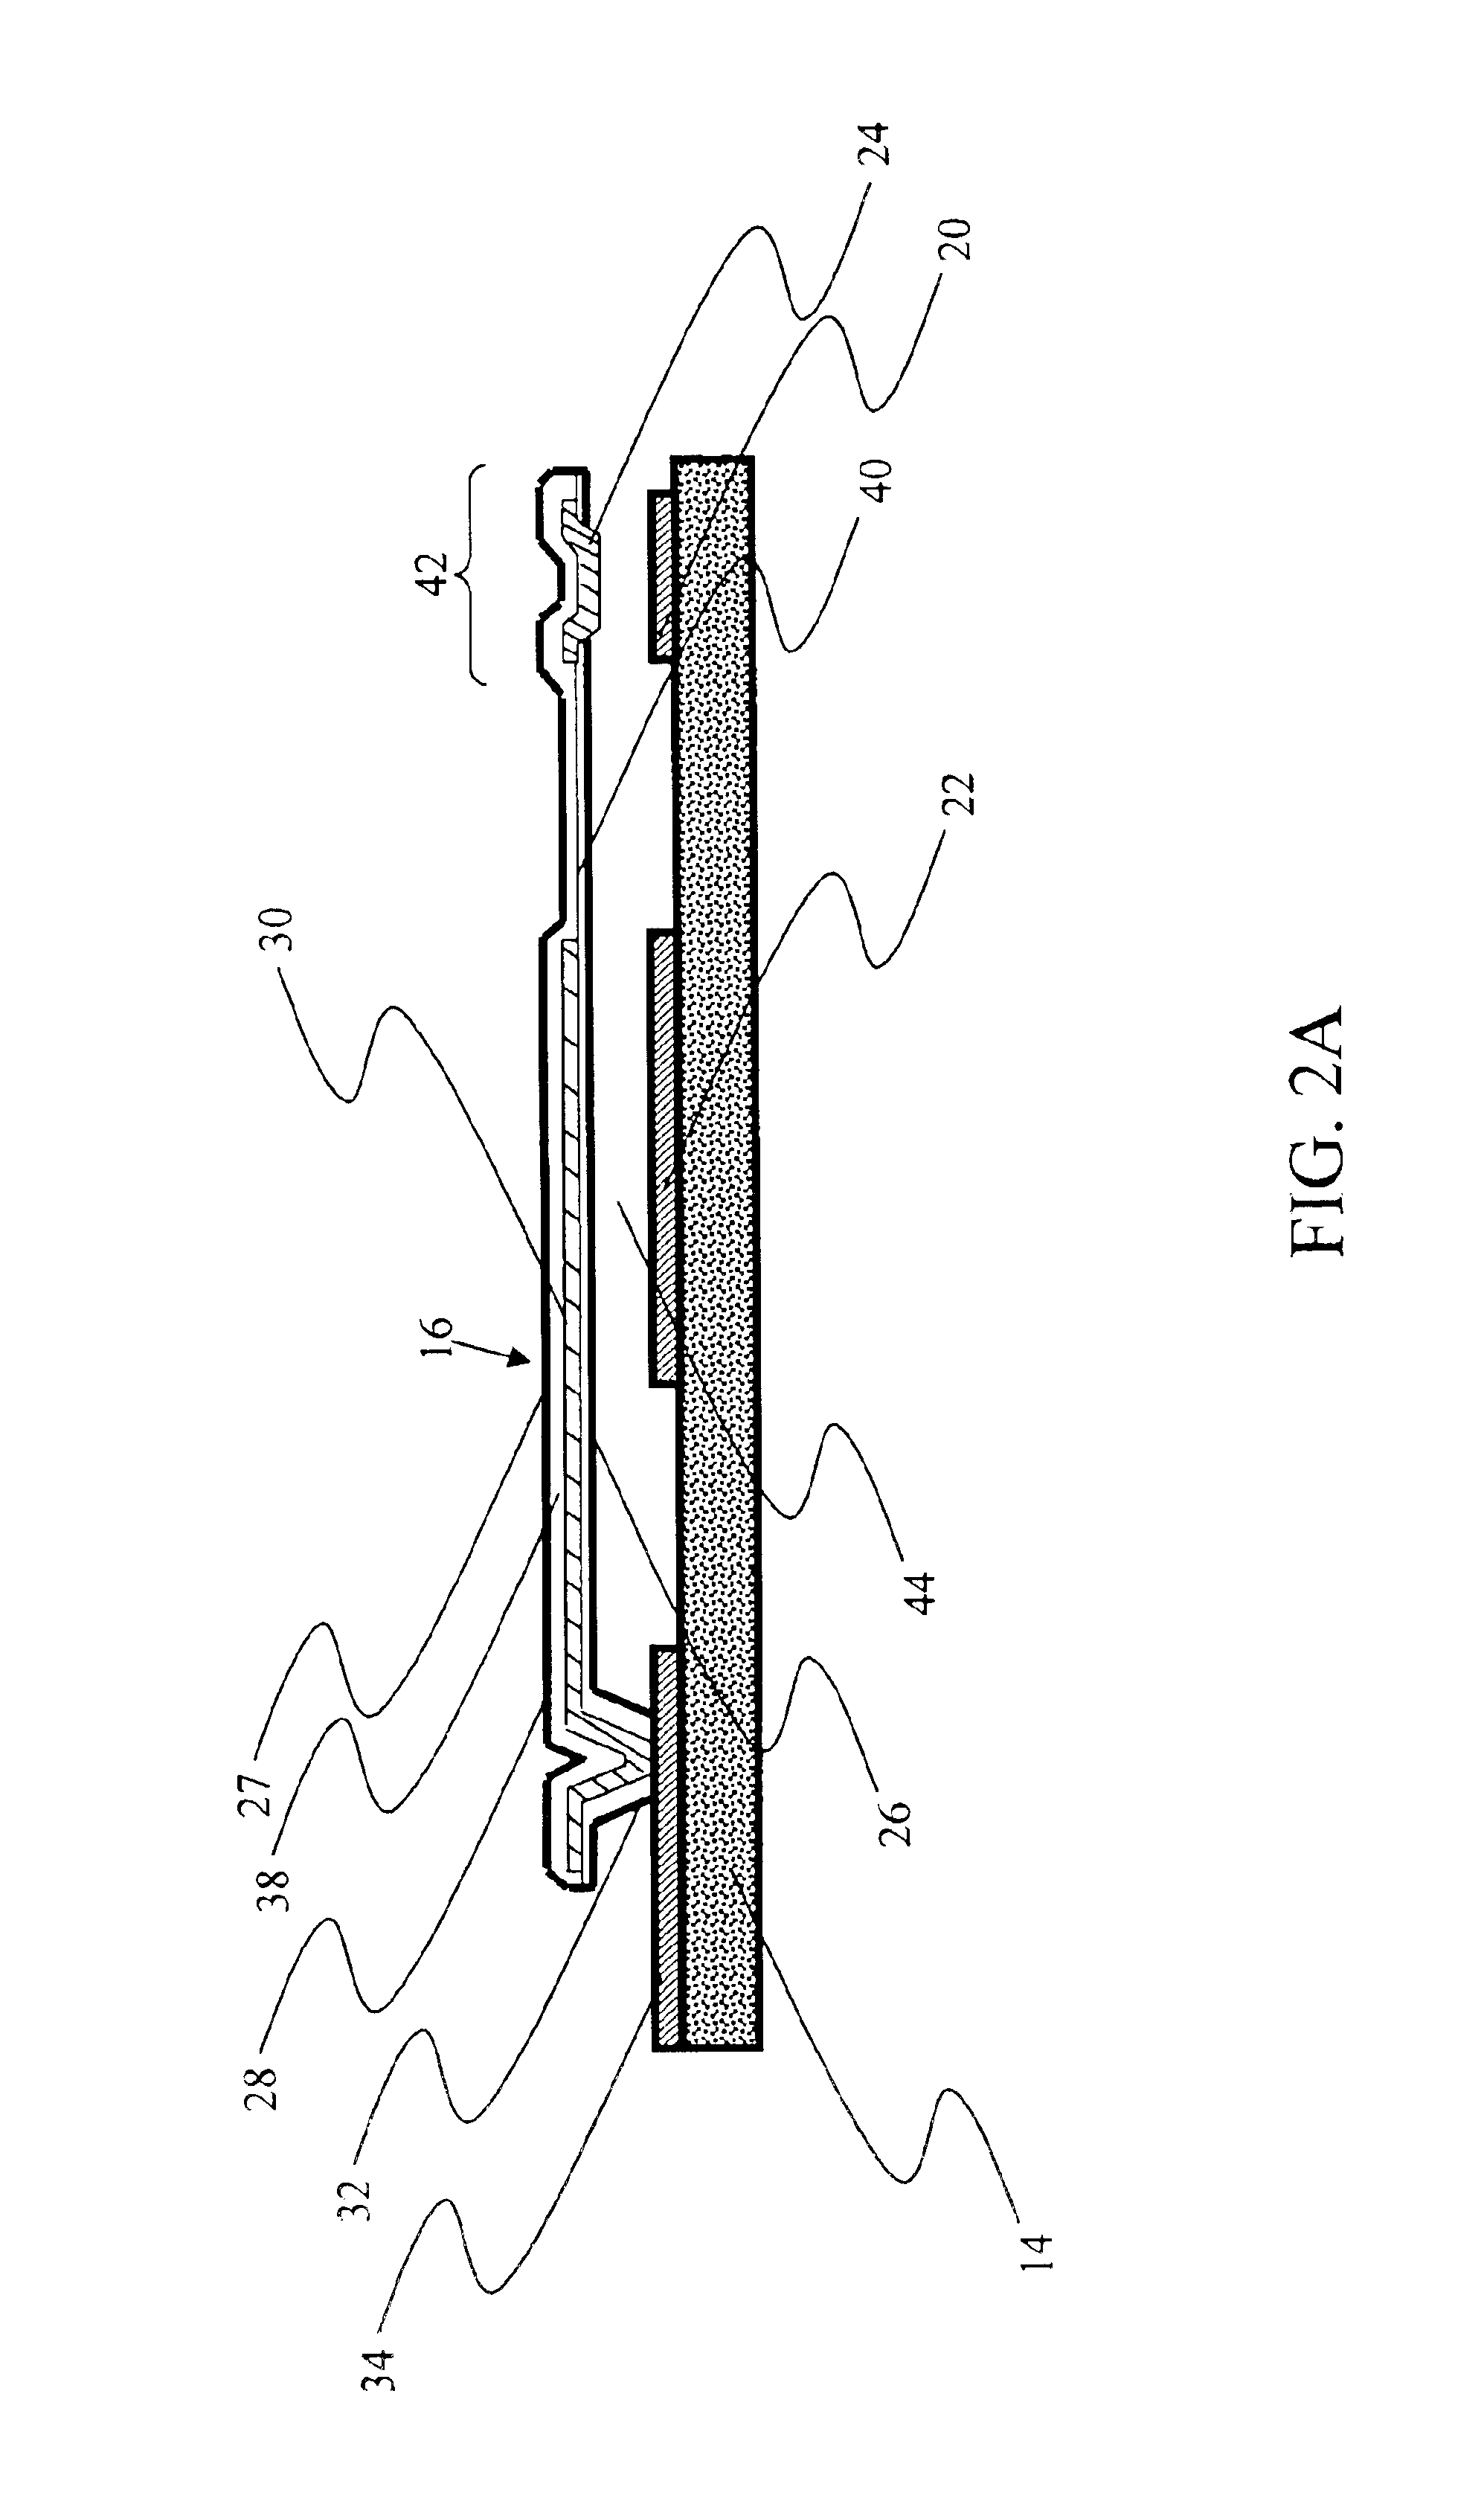 Torsion spring for electro-mechanical switches and a cantilever-type RF micro-electromechanical switch incorporating the torsion spring